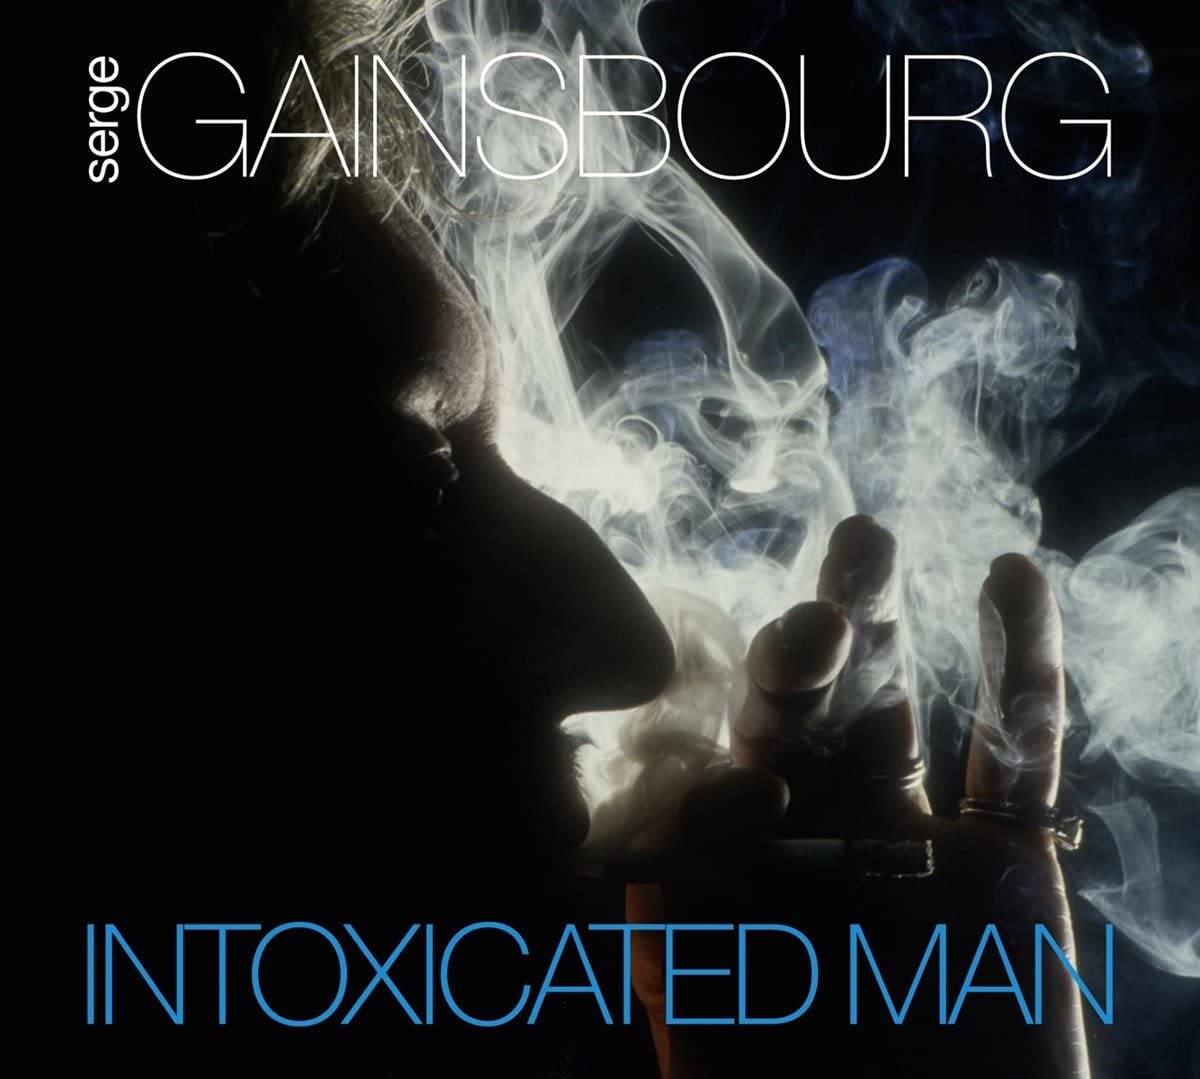 Intoxicated Man | Serge Gainsbourg